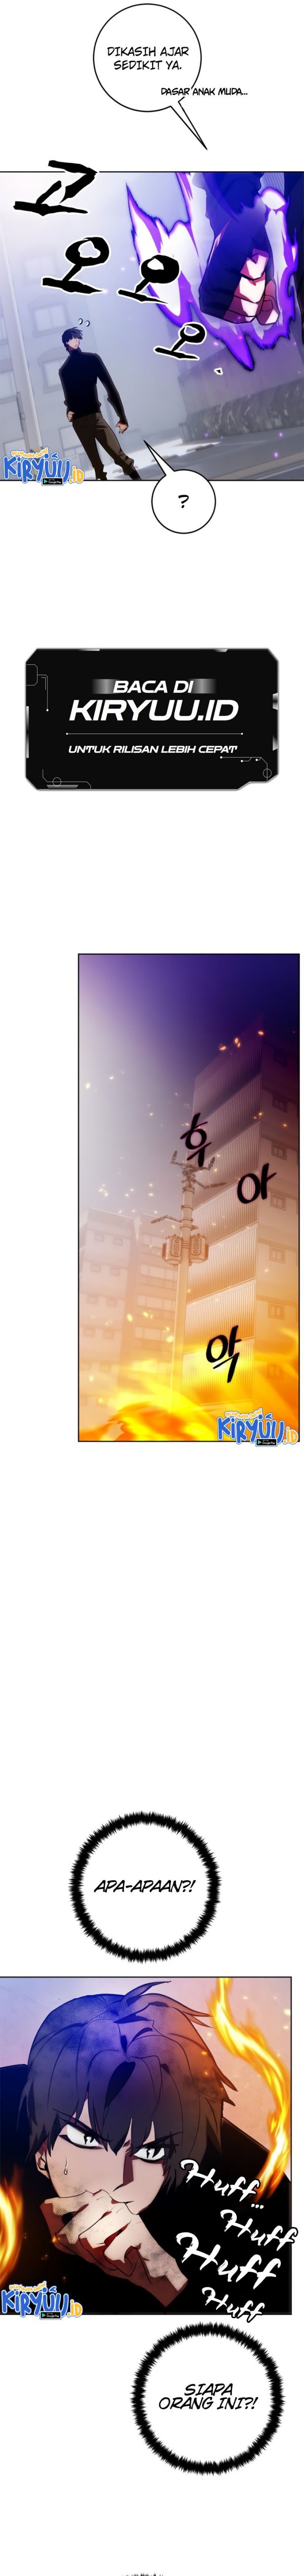 Return to Player Chapter 118